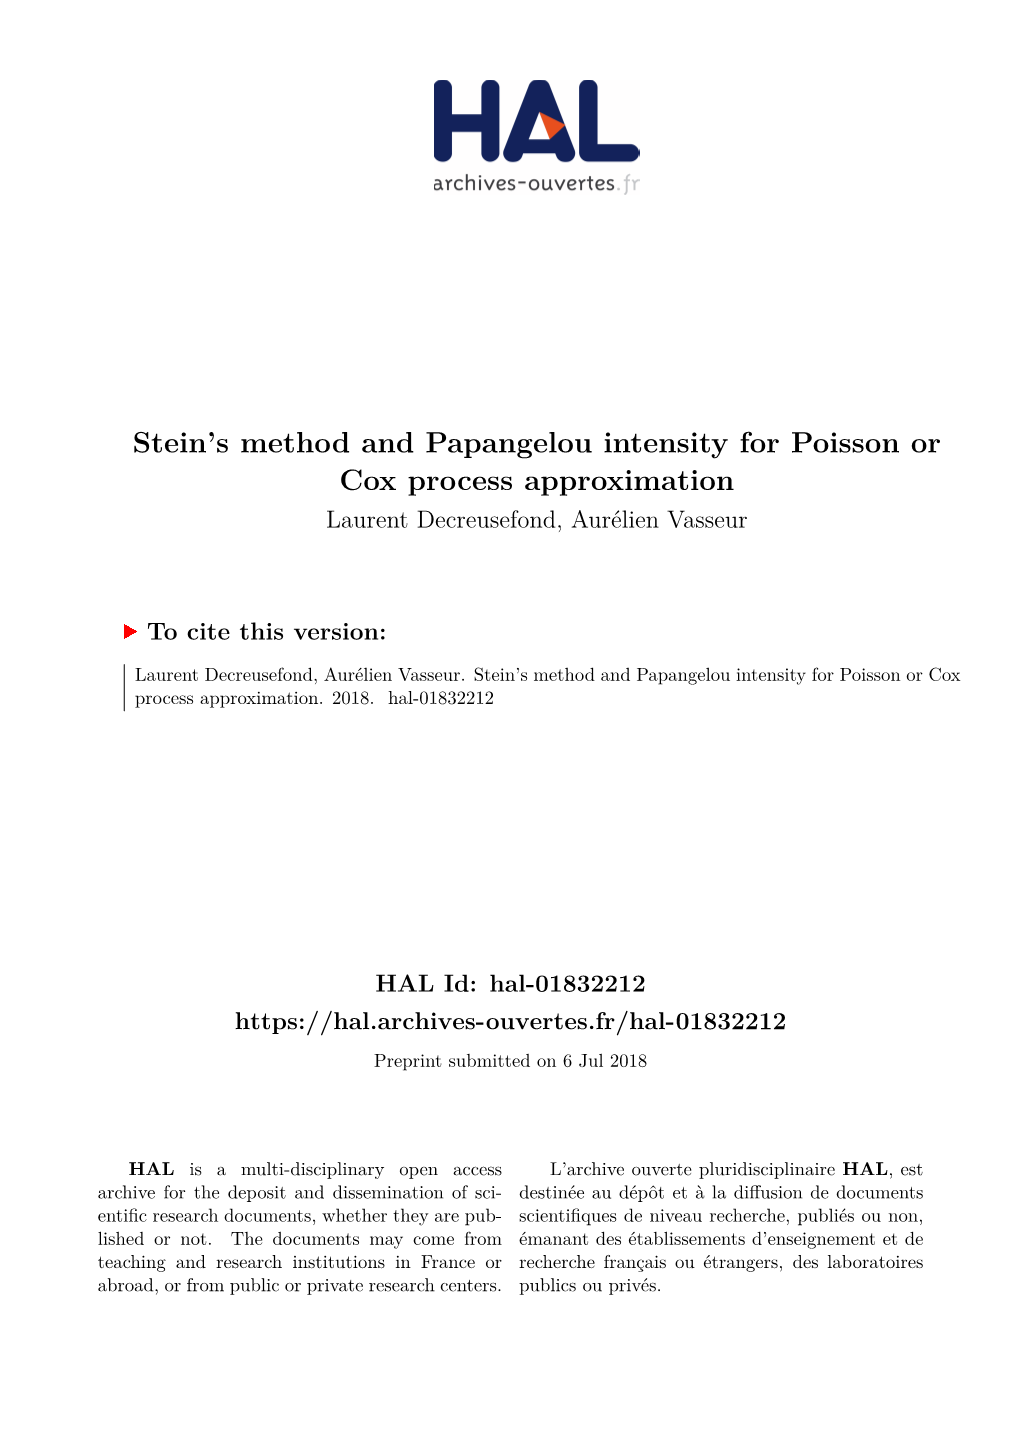 Stein's Method and Papangelou Intensity for Poisson Or Cox Process Approximation